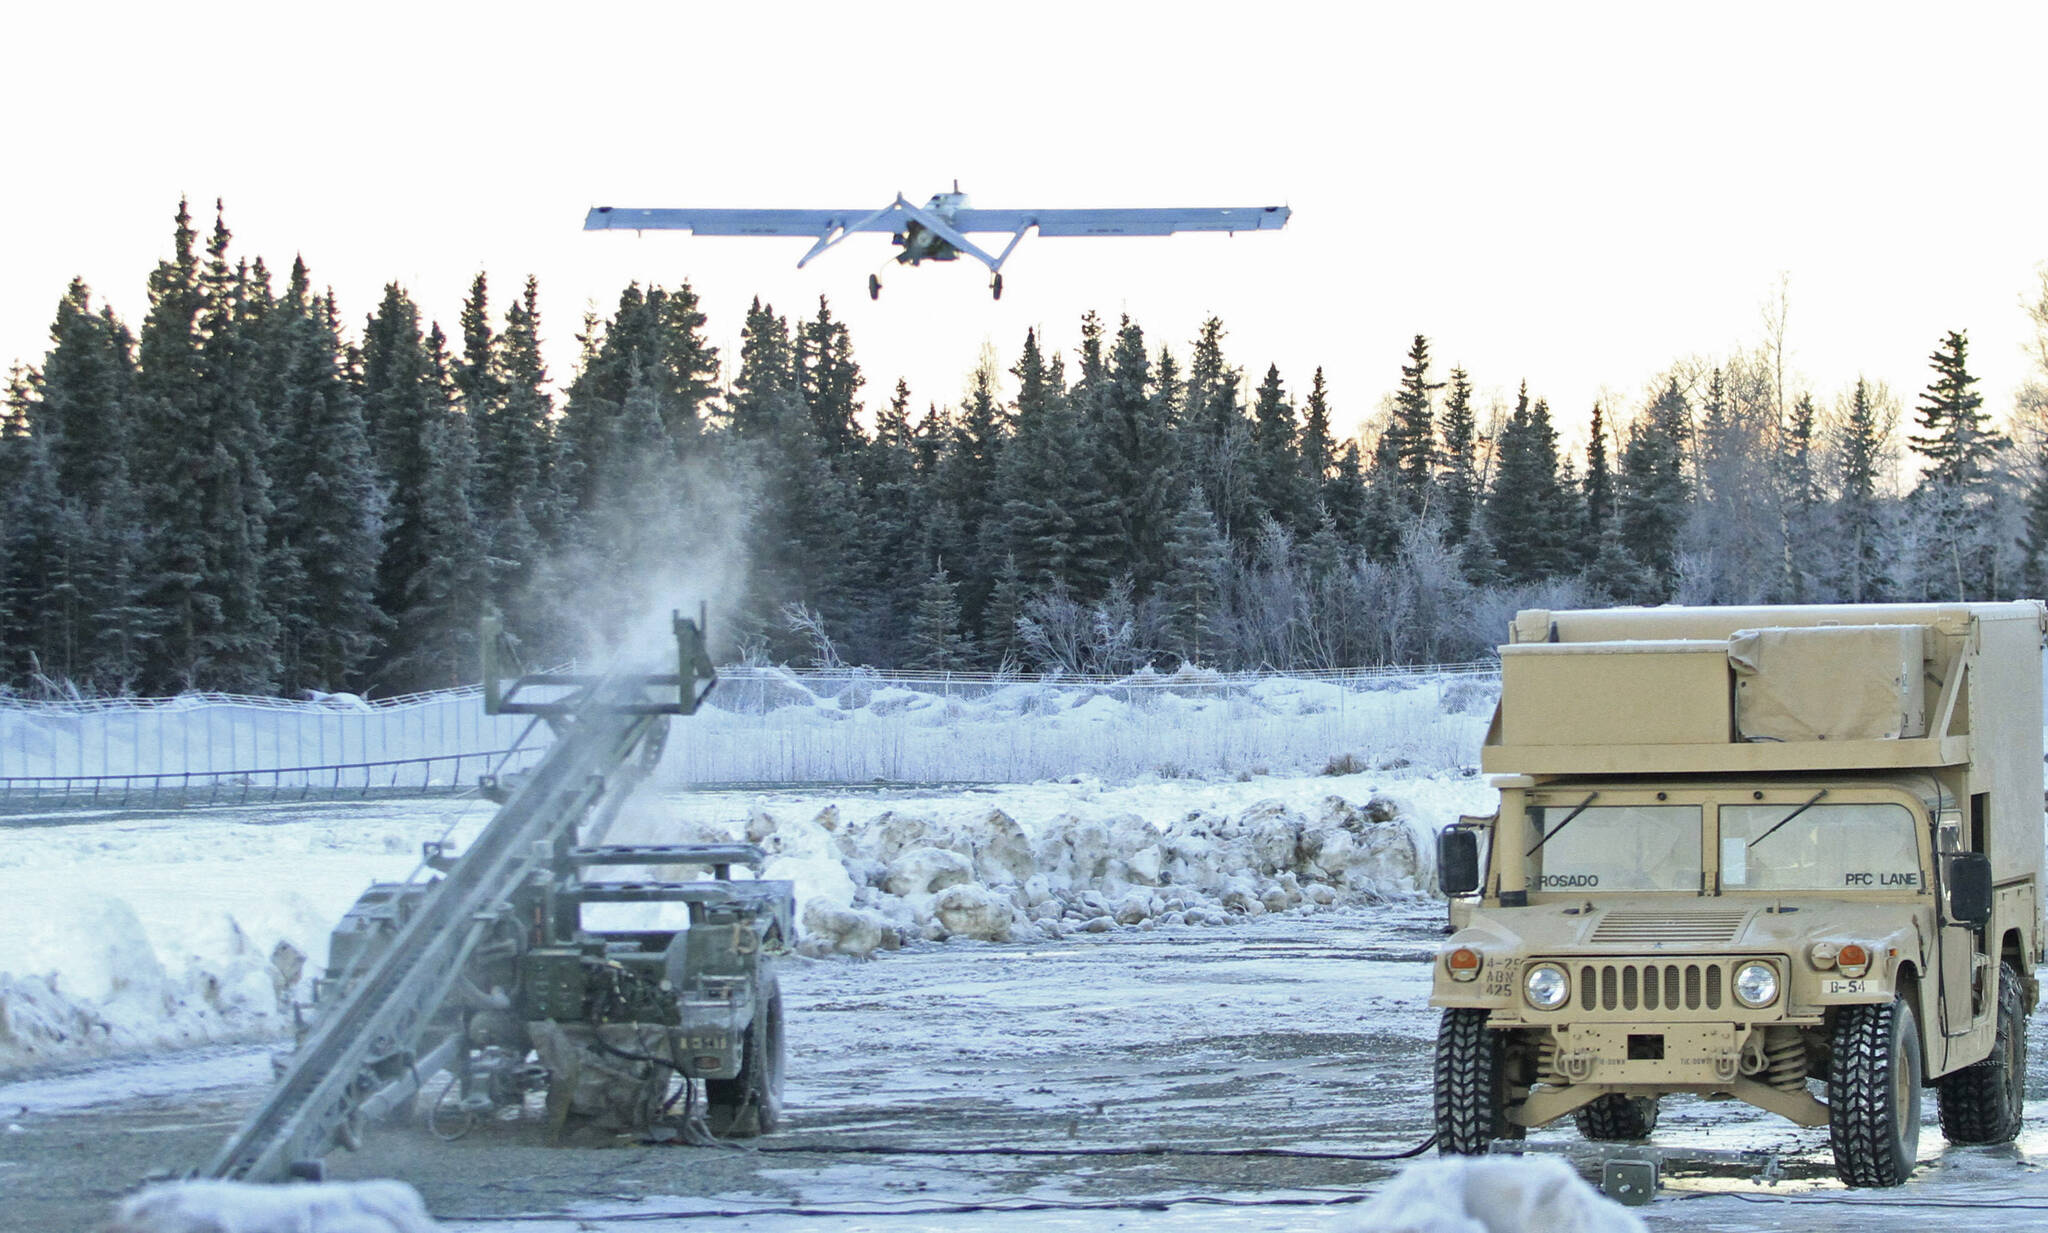 In this Jan. 30, 2014 photo, an RQ7 Shadow unmanned aircraft flies from its pneumatic catapult launcher at Joint Base Elmendorf-Richardson in Anchorage, Alaska. U.S. military bases in the Arctic and sub-Arctic are failing to harden their installations against long-term climate change as required, even though soaring temperatures and melting ice already are cracking base runways and roads and worsening flood risks up north, the Pentagon’s watchdog office said April 14, 2022. (AP Photo / Dan Joling)